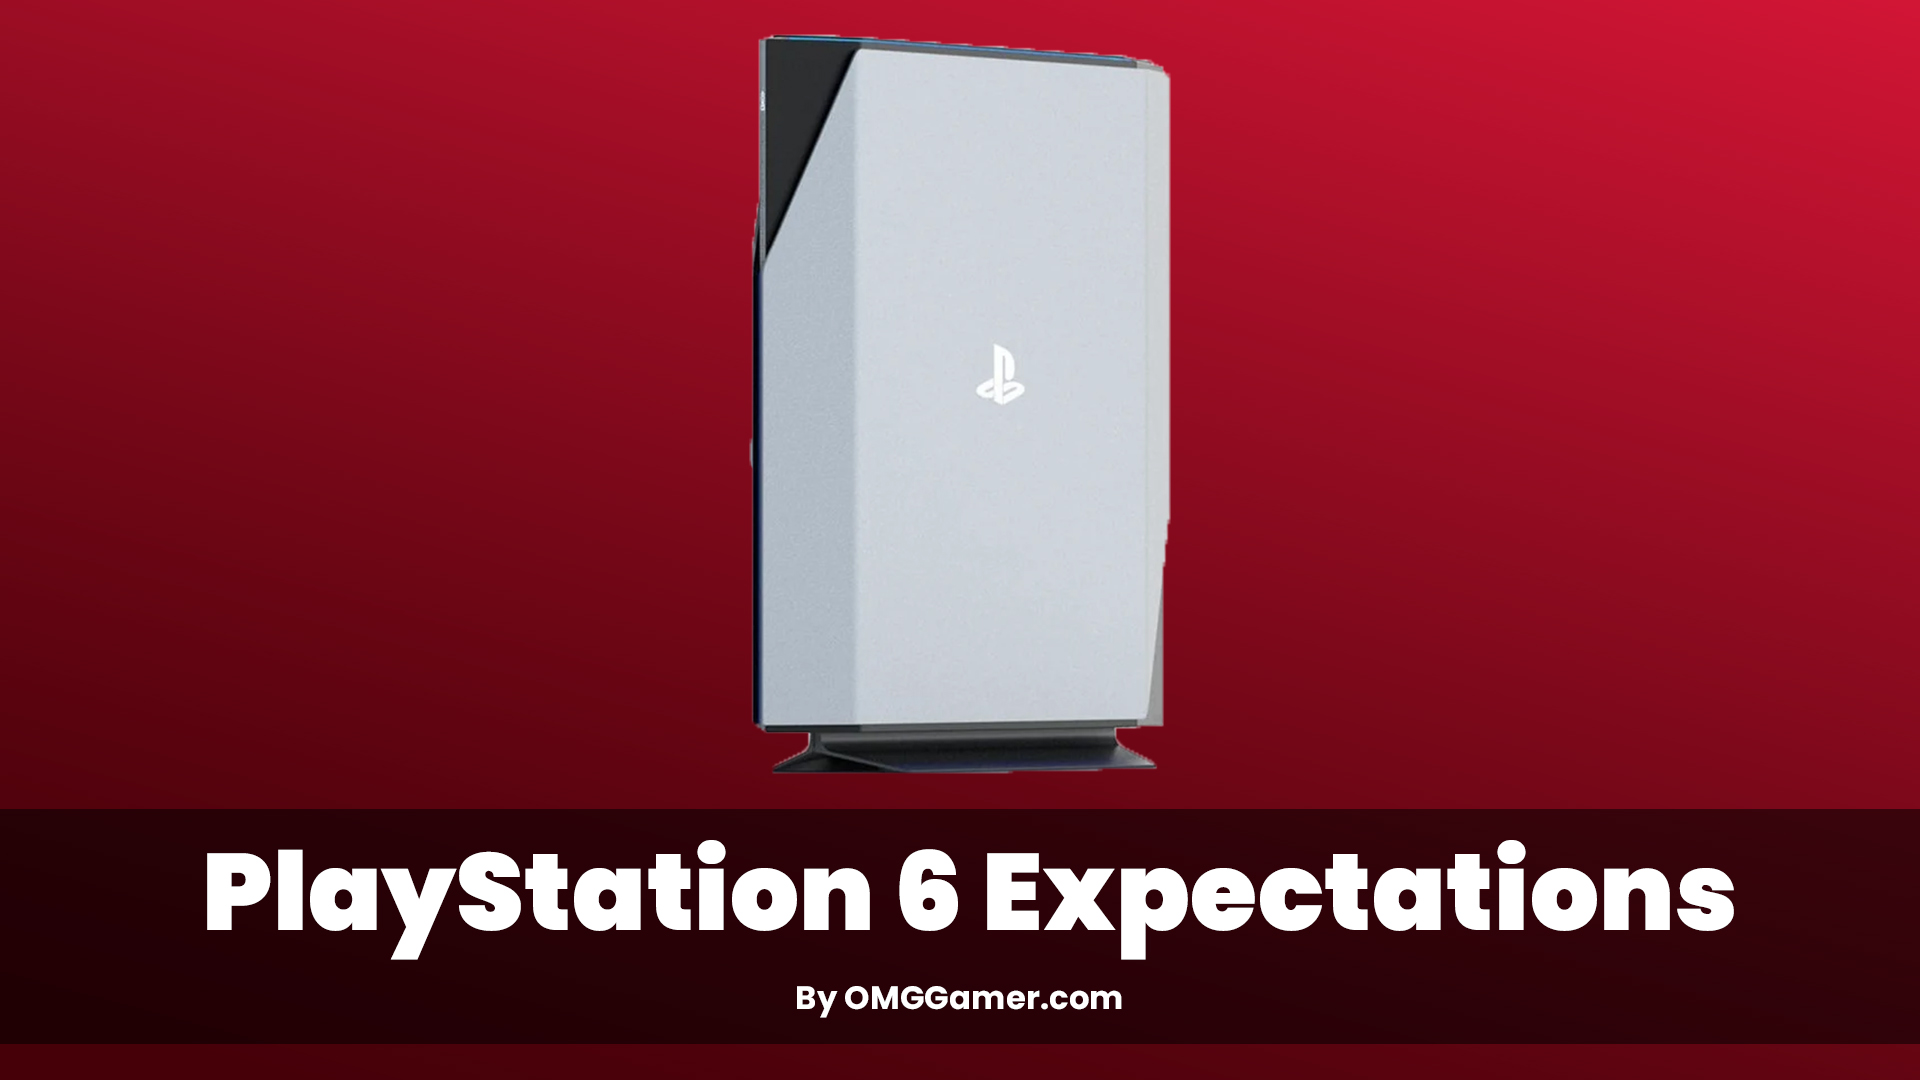 PlayStation 6 Expectations